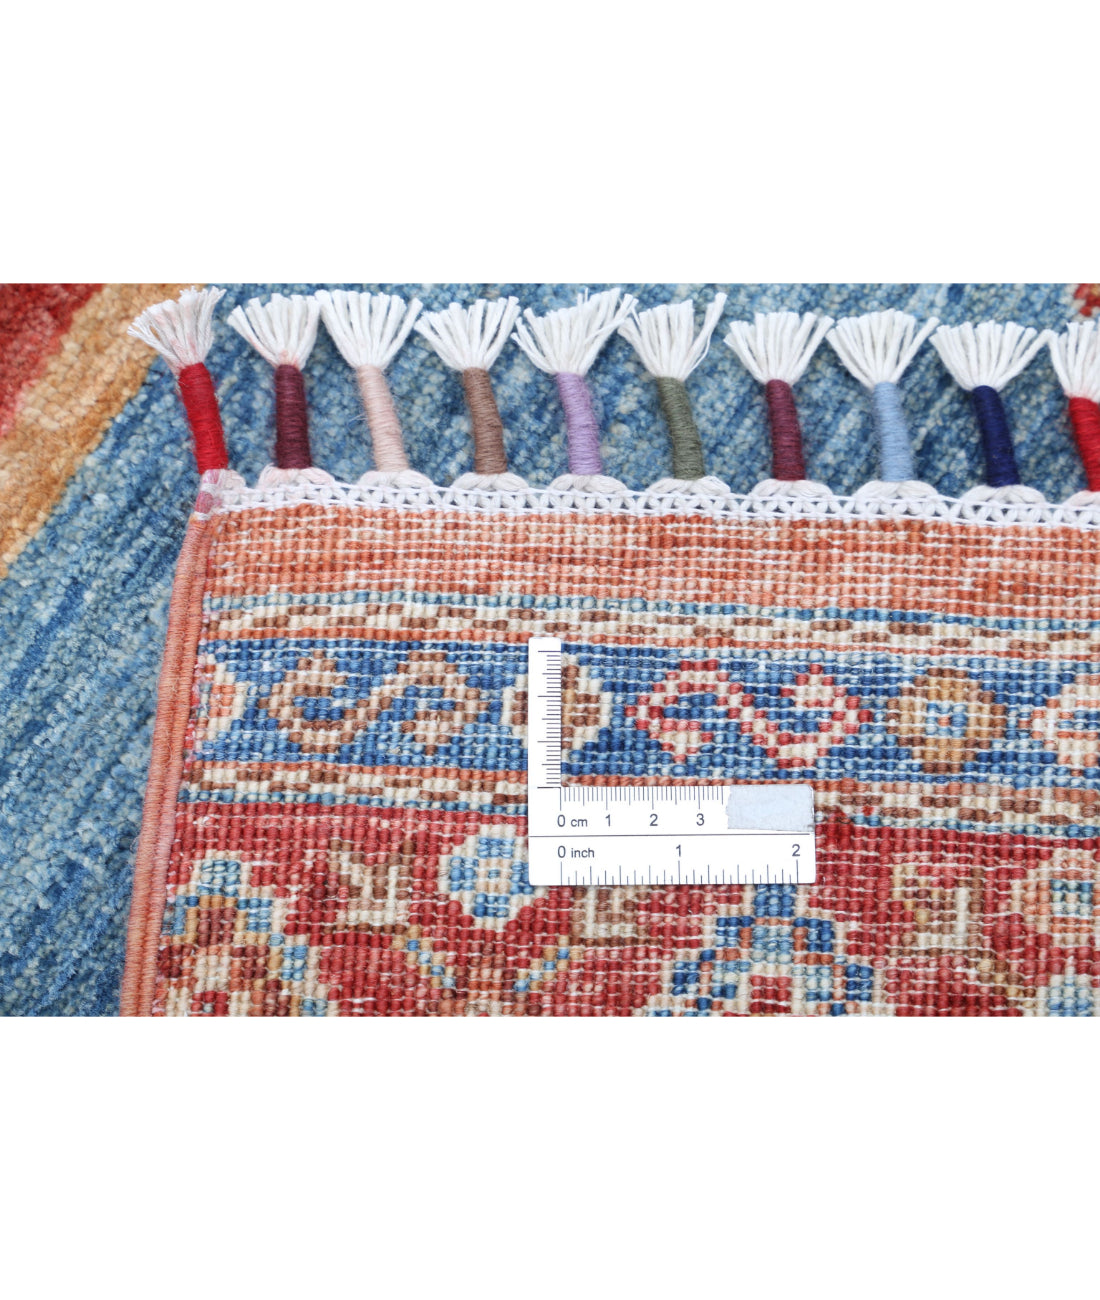 Hand Knotted Khurjeen Wool Rug - 2'7'' x 3'9'' 2'7'' x 3'9'' (78 X 113) / Multi / Multi